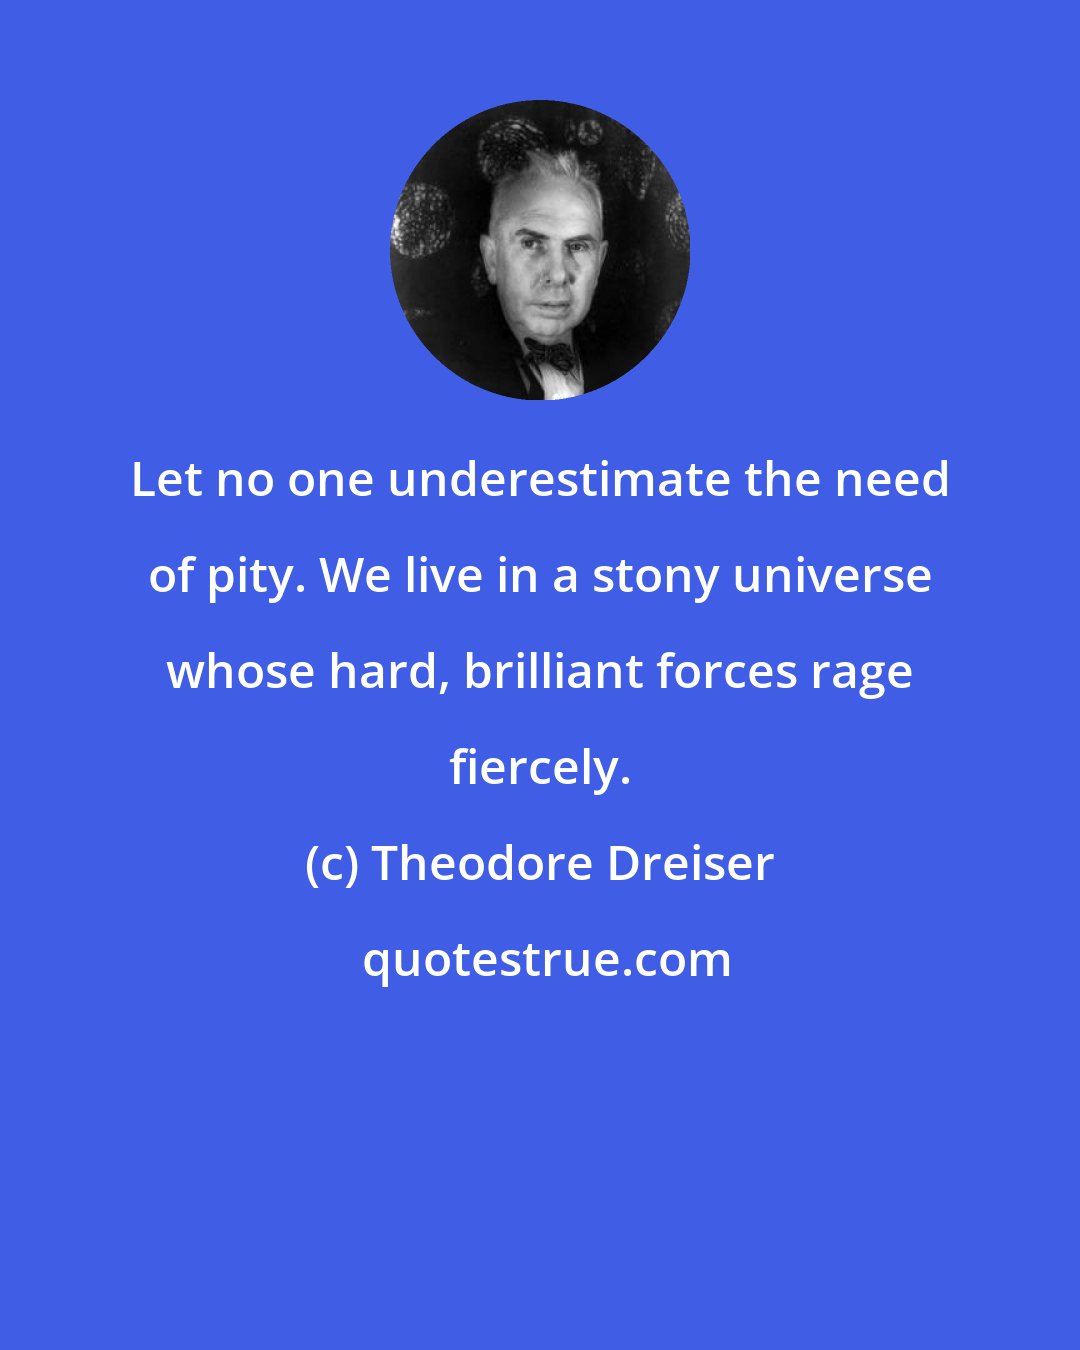 Theodore Dreiser: Let no one underestimate the need of pity. We live in a stony universe whose hard, brilliant forces rage fiercely.